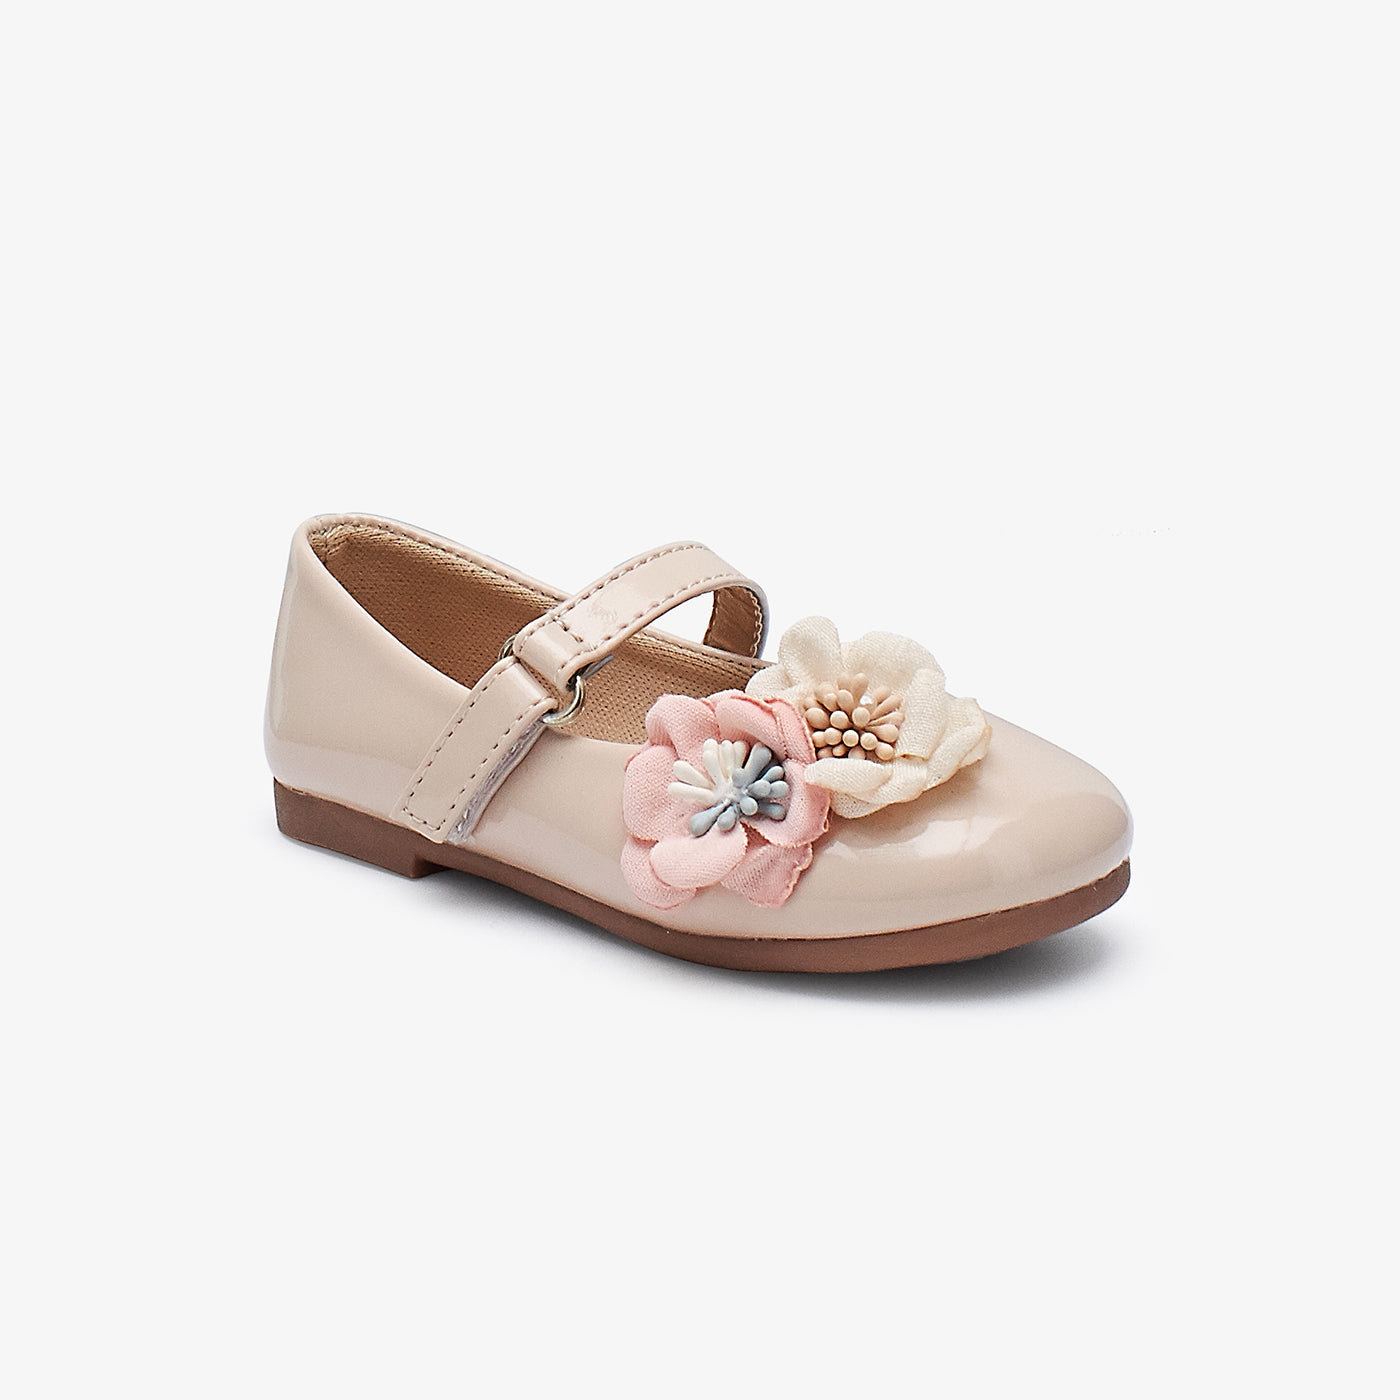 Floral Girl Shoes